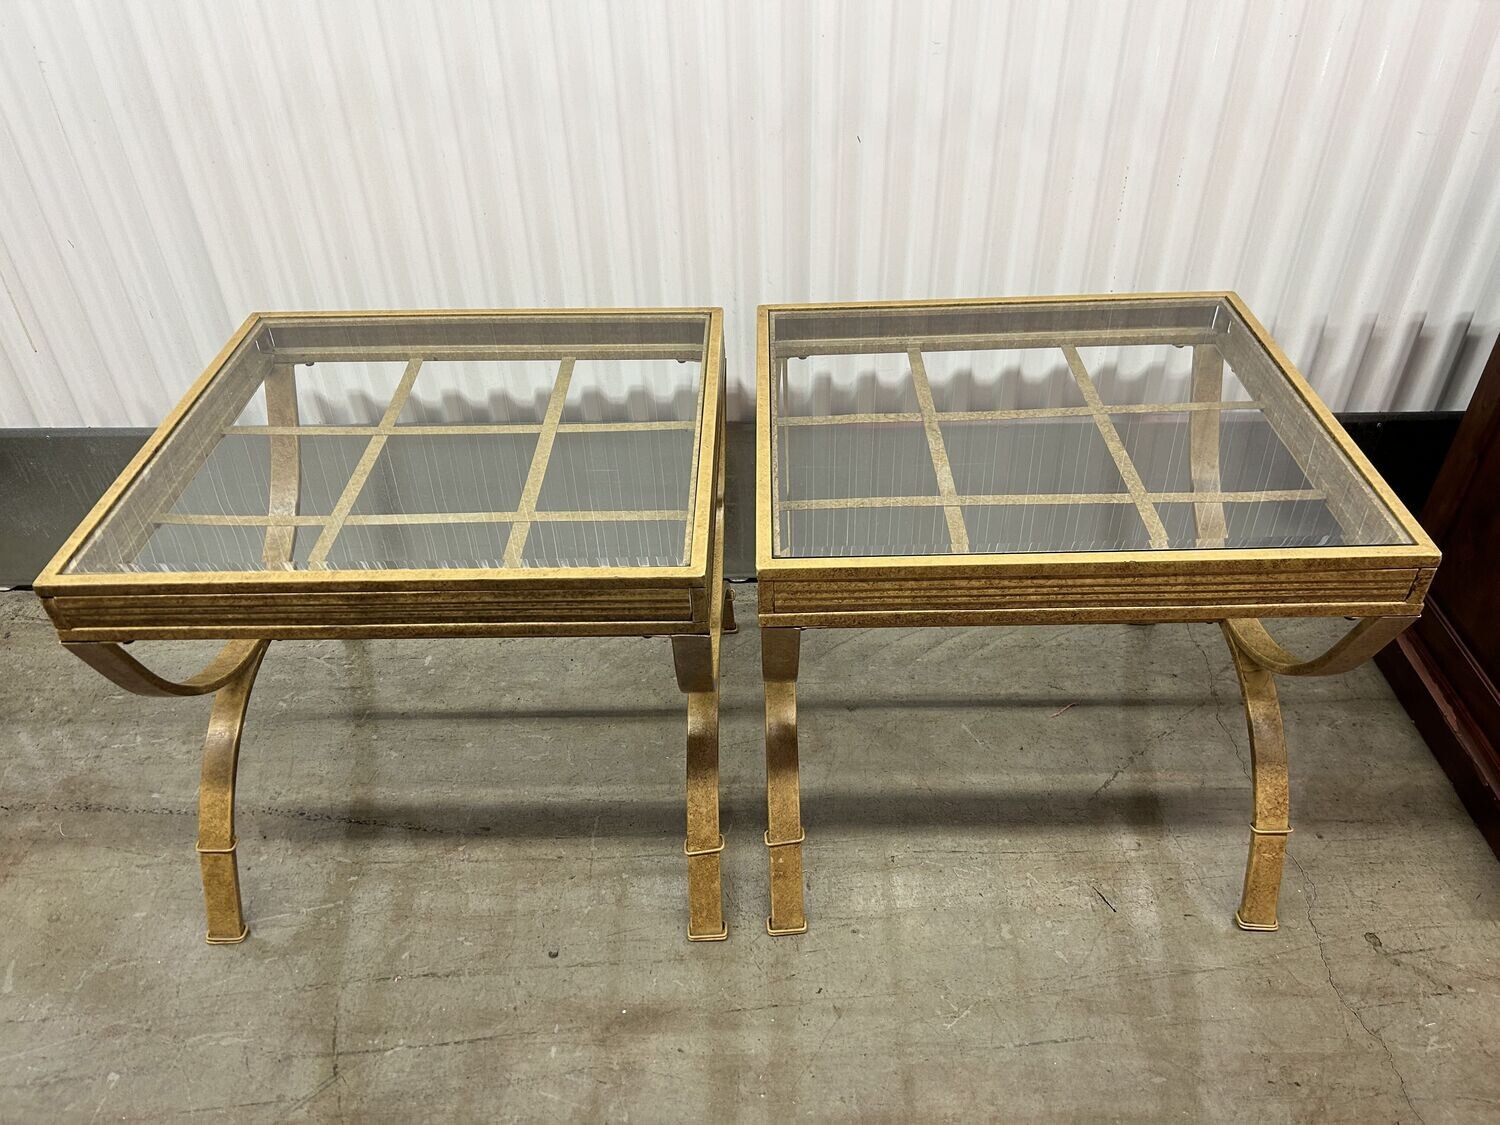 "Aged-look" Gold Metal End Tables, glass top #2103